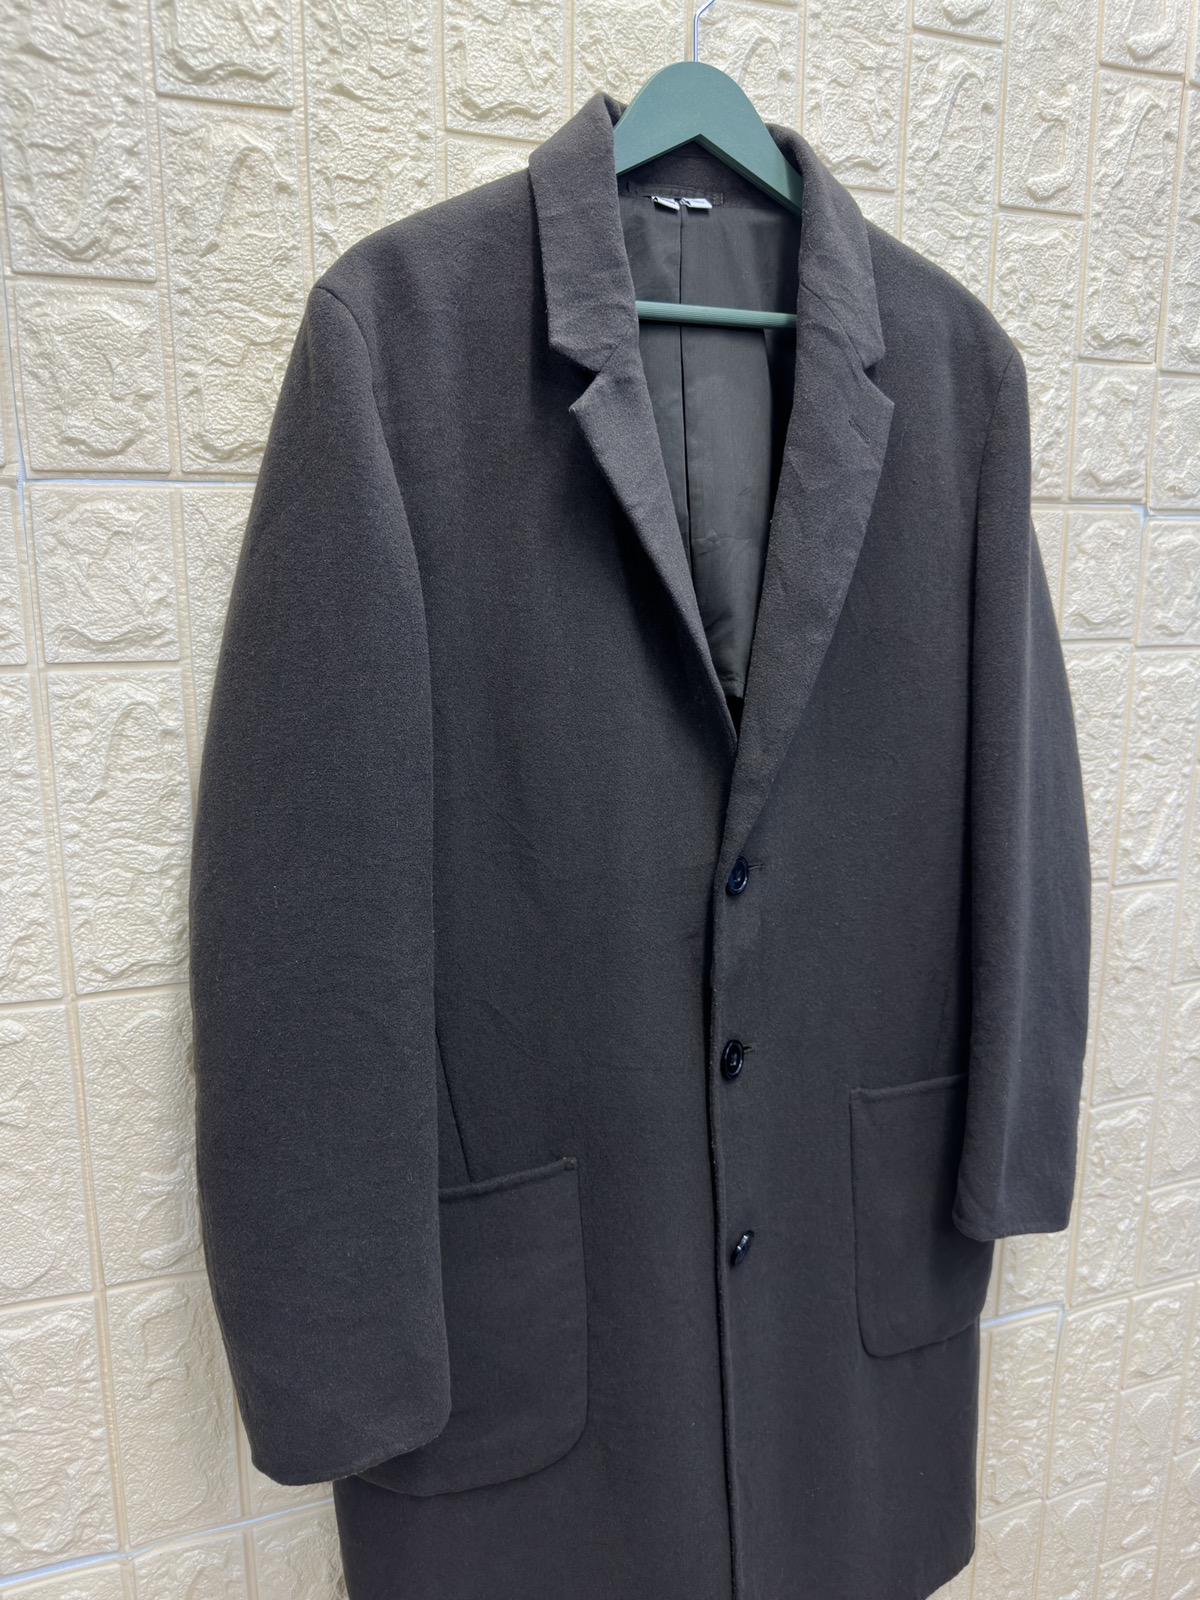 Undercover X Uniqlo Wool Trench Coat-GR97 - 3